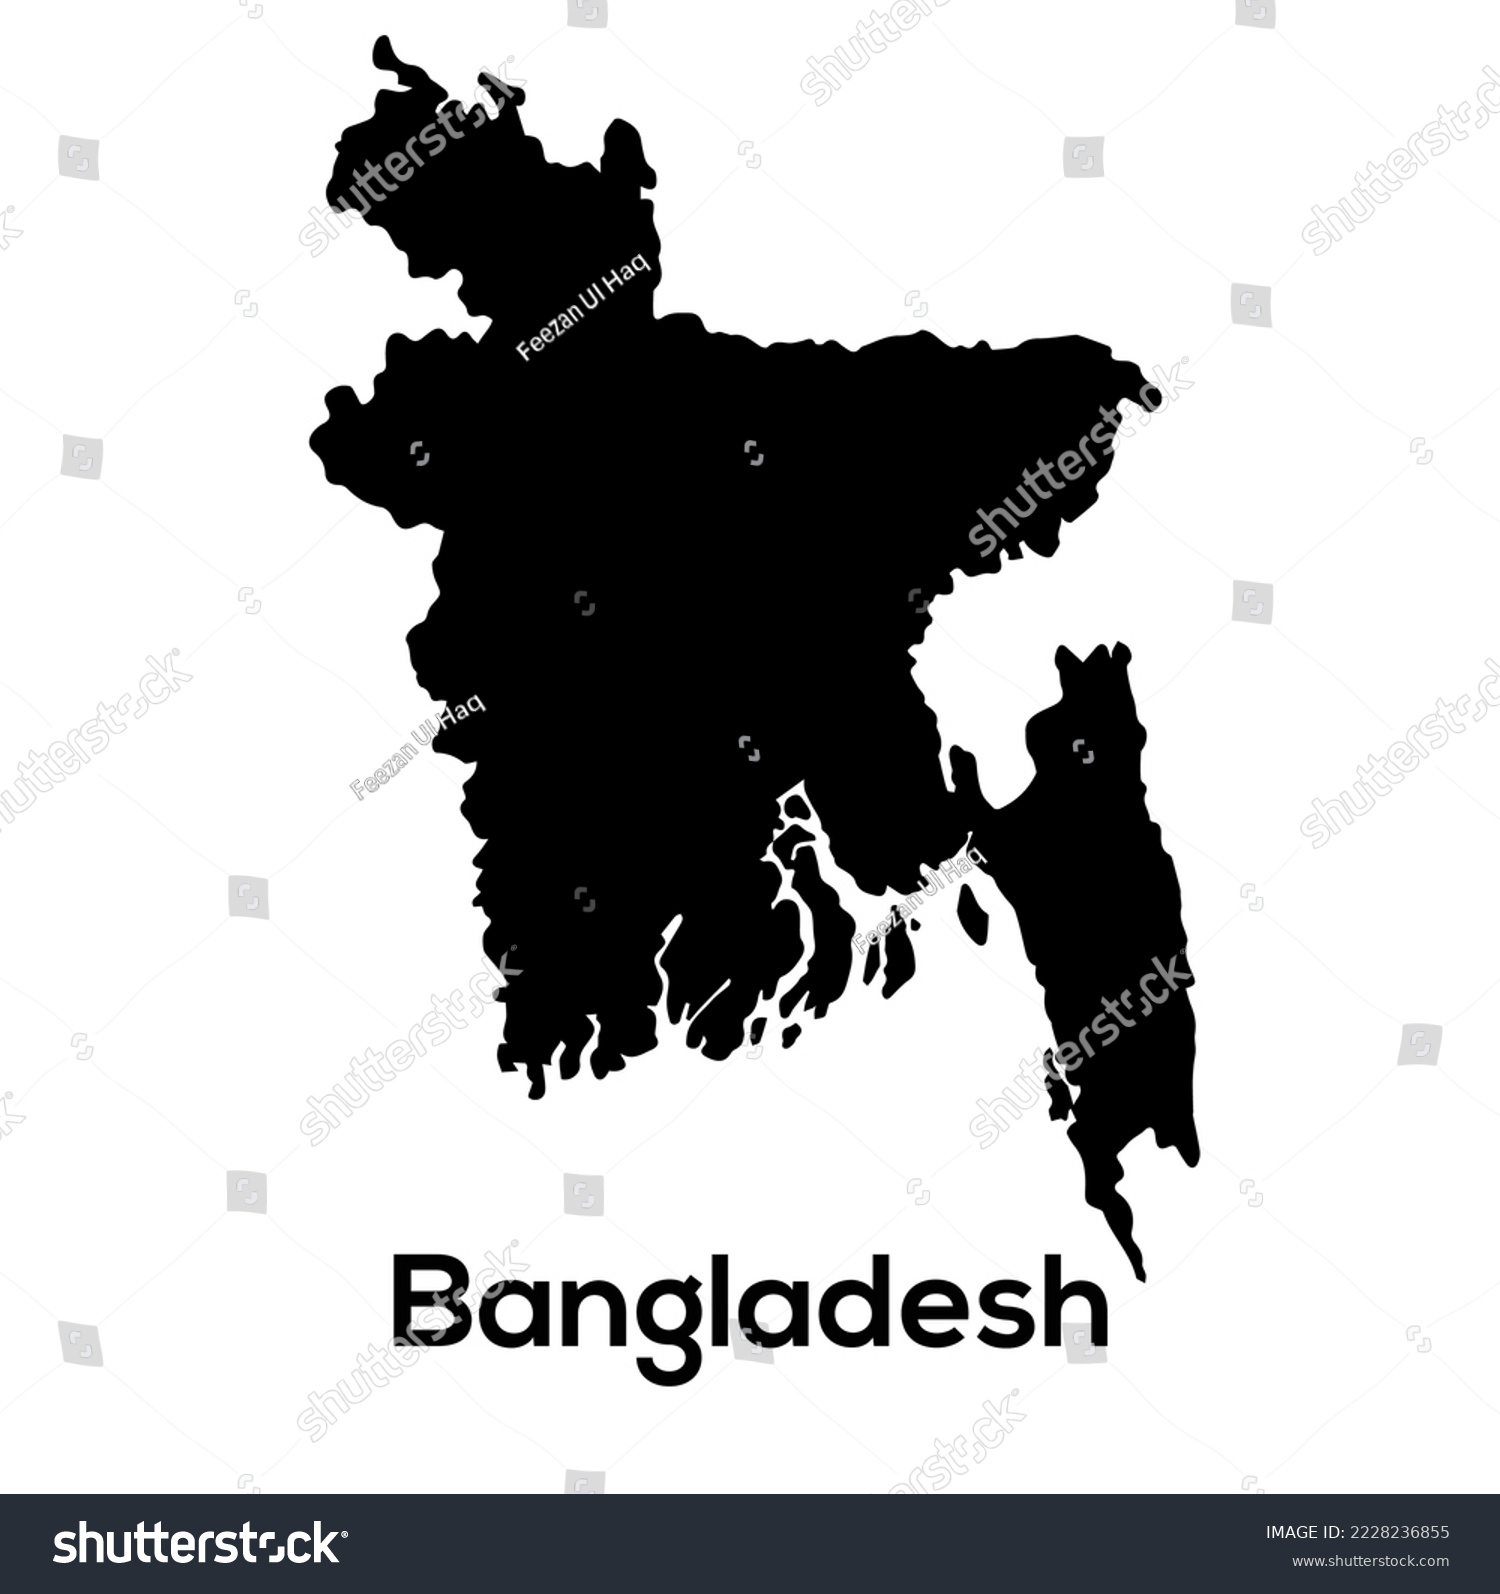 High detailed vector map - Bangladesh Map silhouette Vector file with country name #2228236855